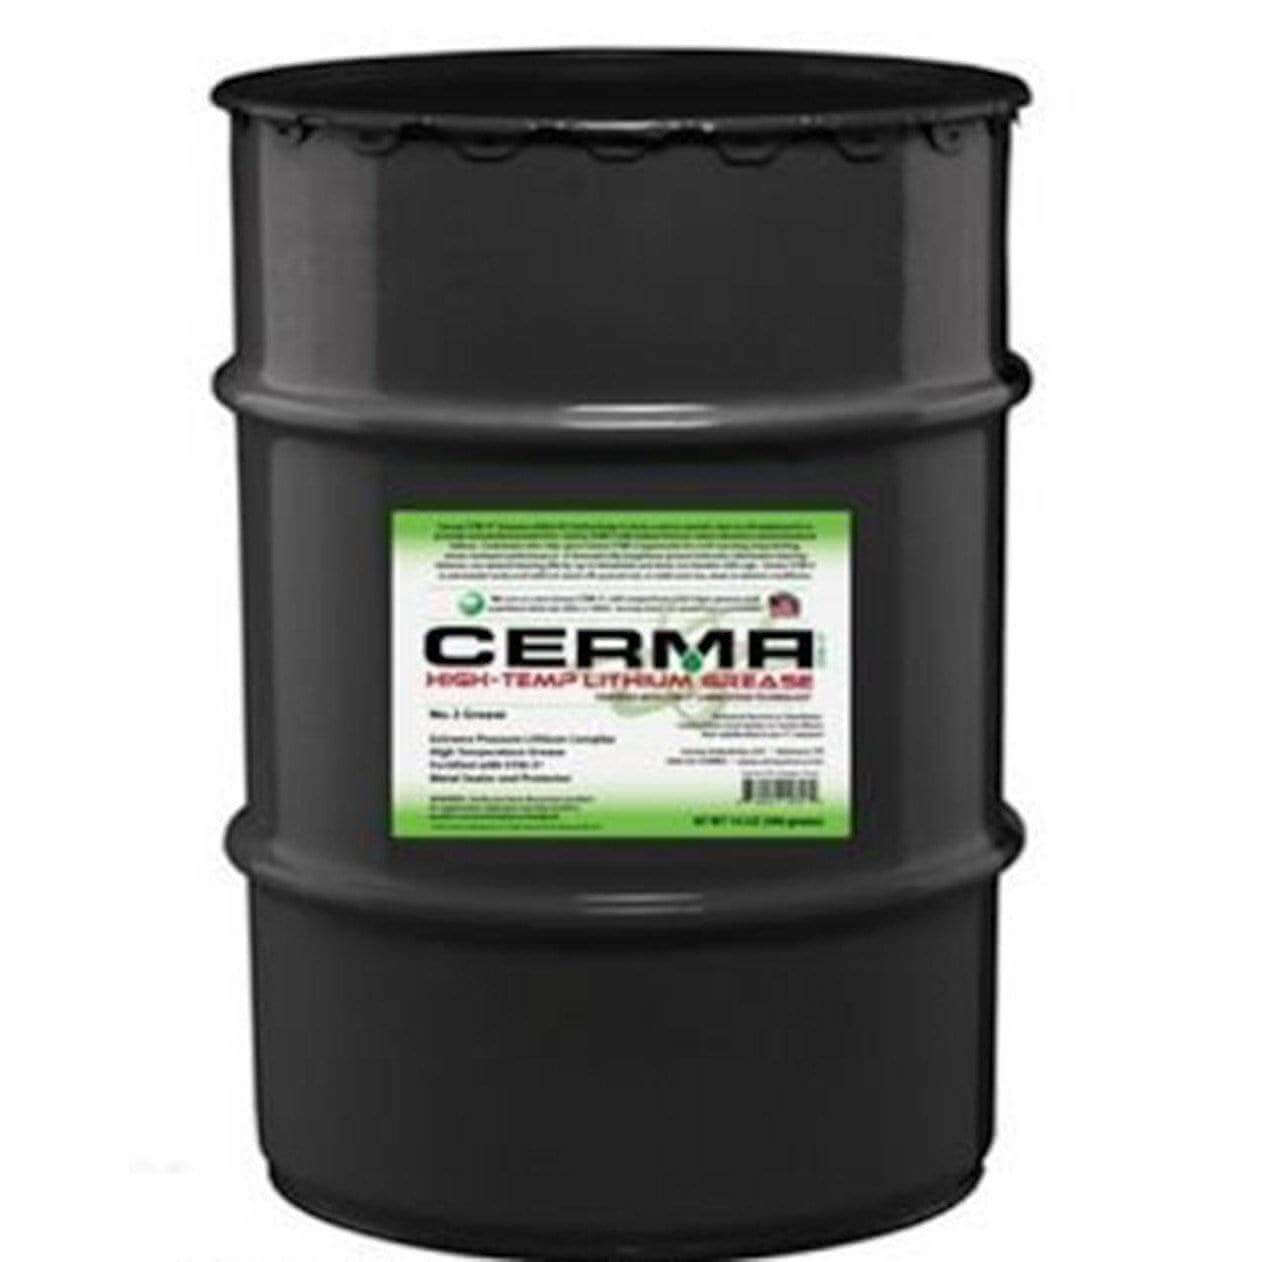 Cerma Hi Temperature Lithium Grease at $4073.01 only from cermatreatment.com